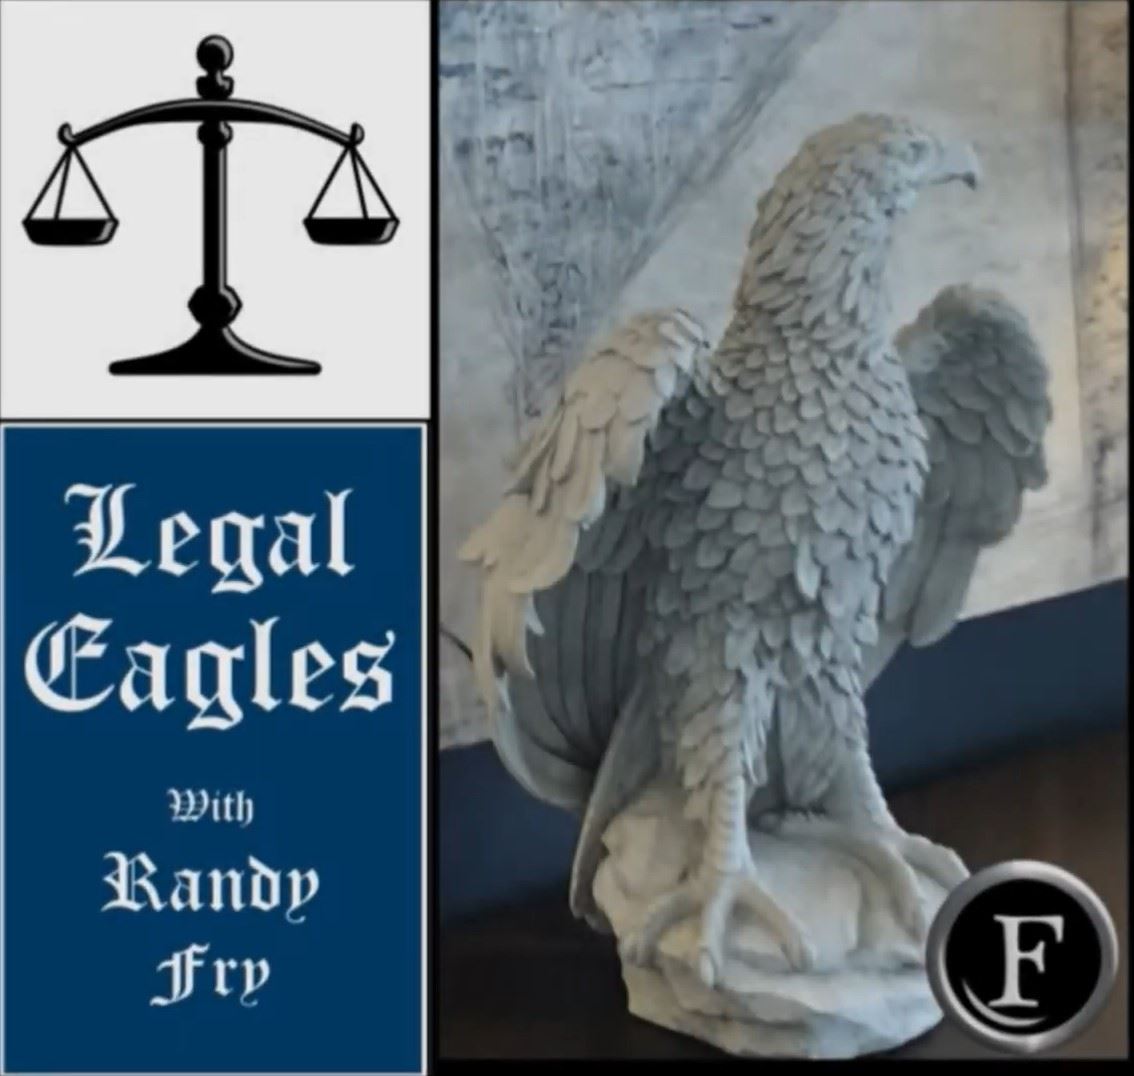 Legal Eagles podcast